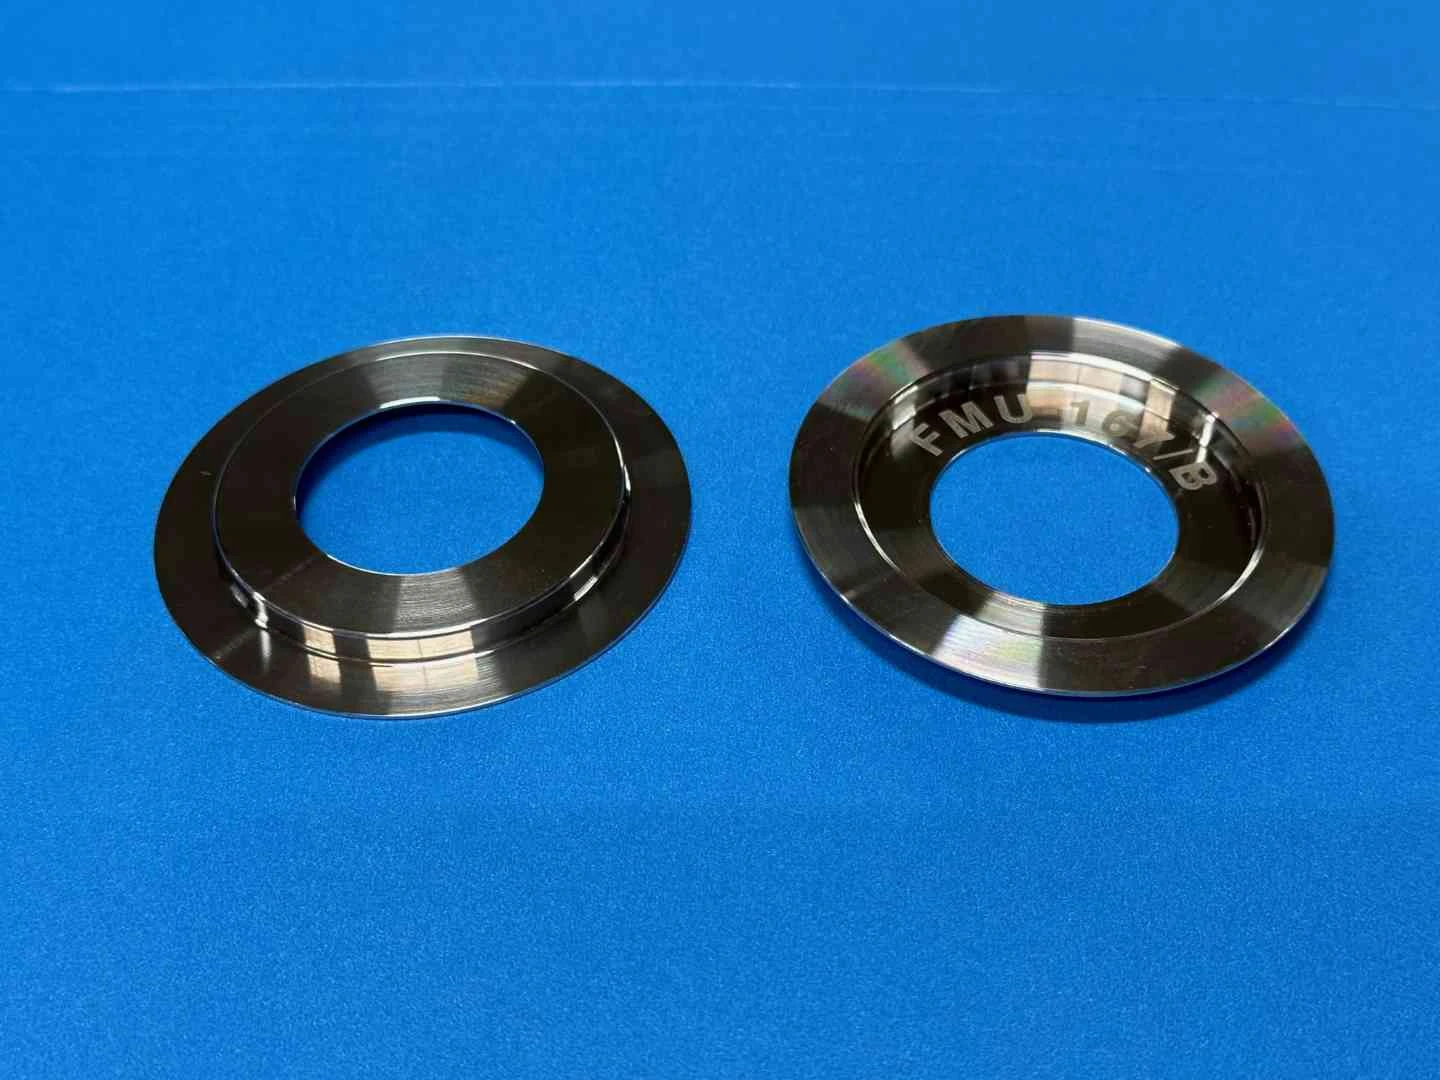 We manufacture high-quality, reliable flange fittings that can withstand high pressure and vibration.